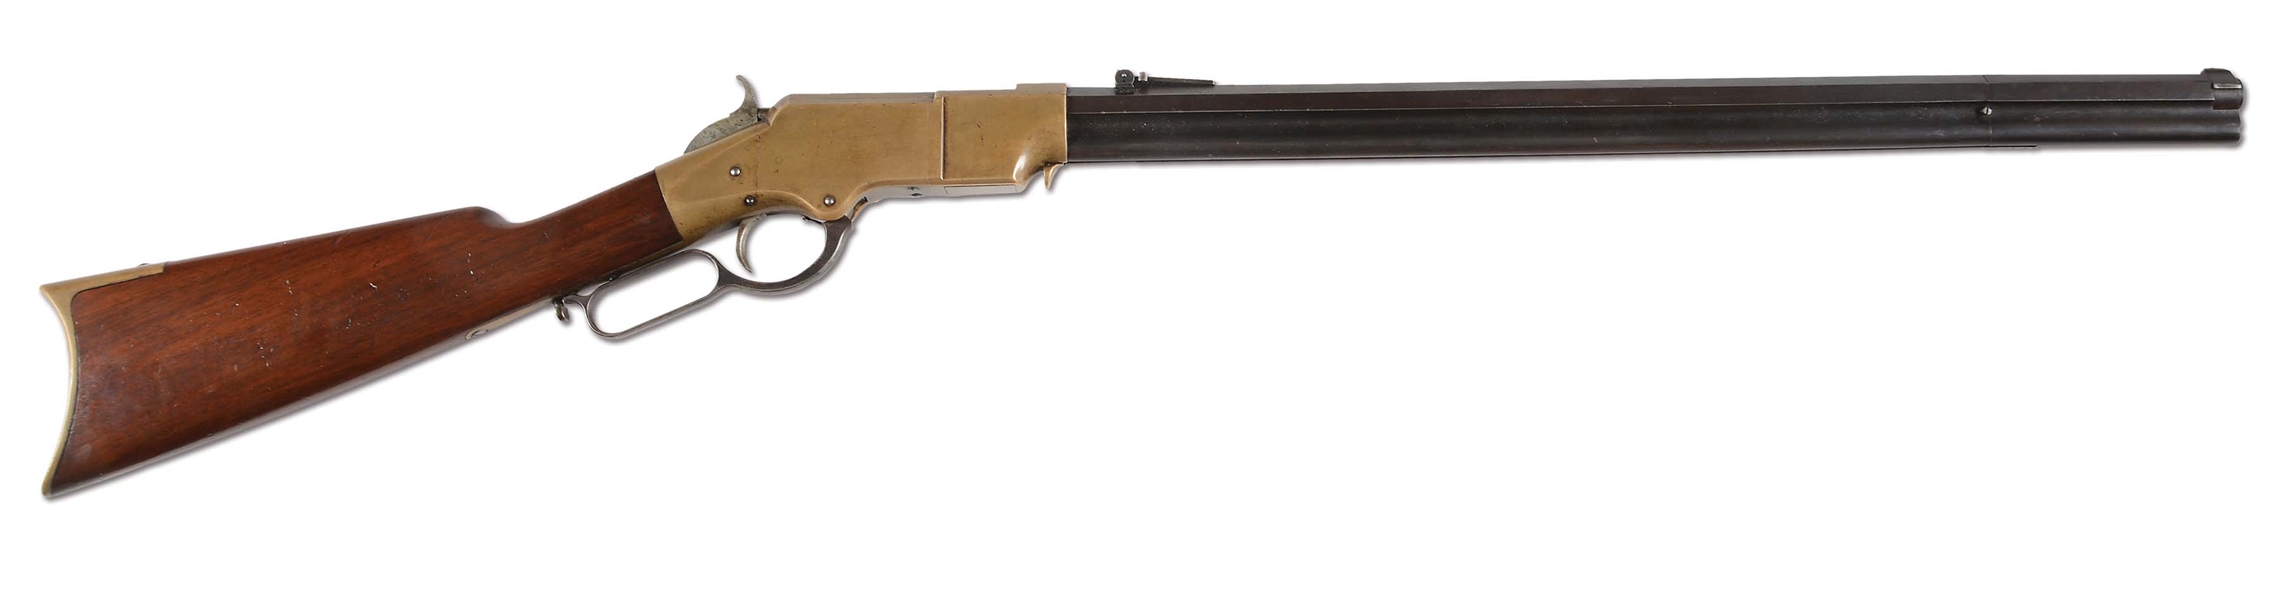 (A) EXCEPTIONALLY FINE 3RD MODEL 1860 LEVER ACTION HENRY RIFLE (1865).